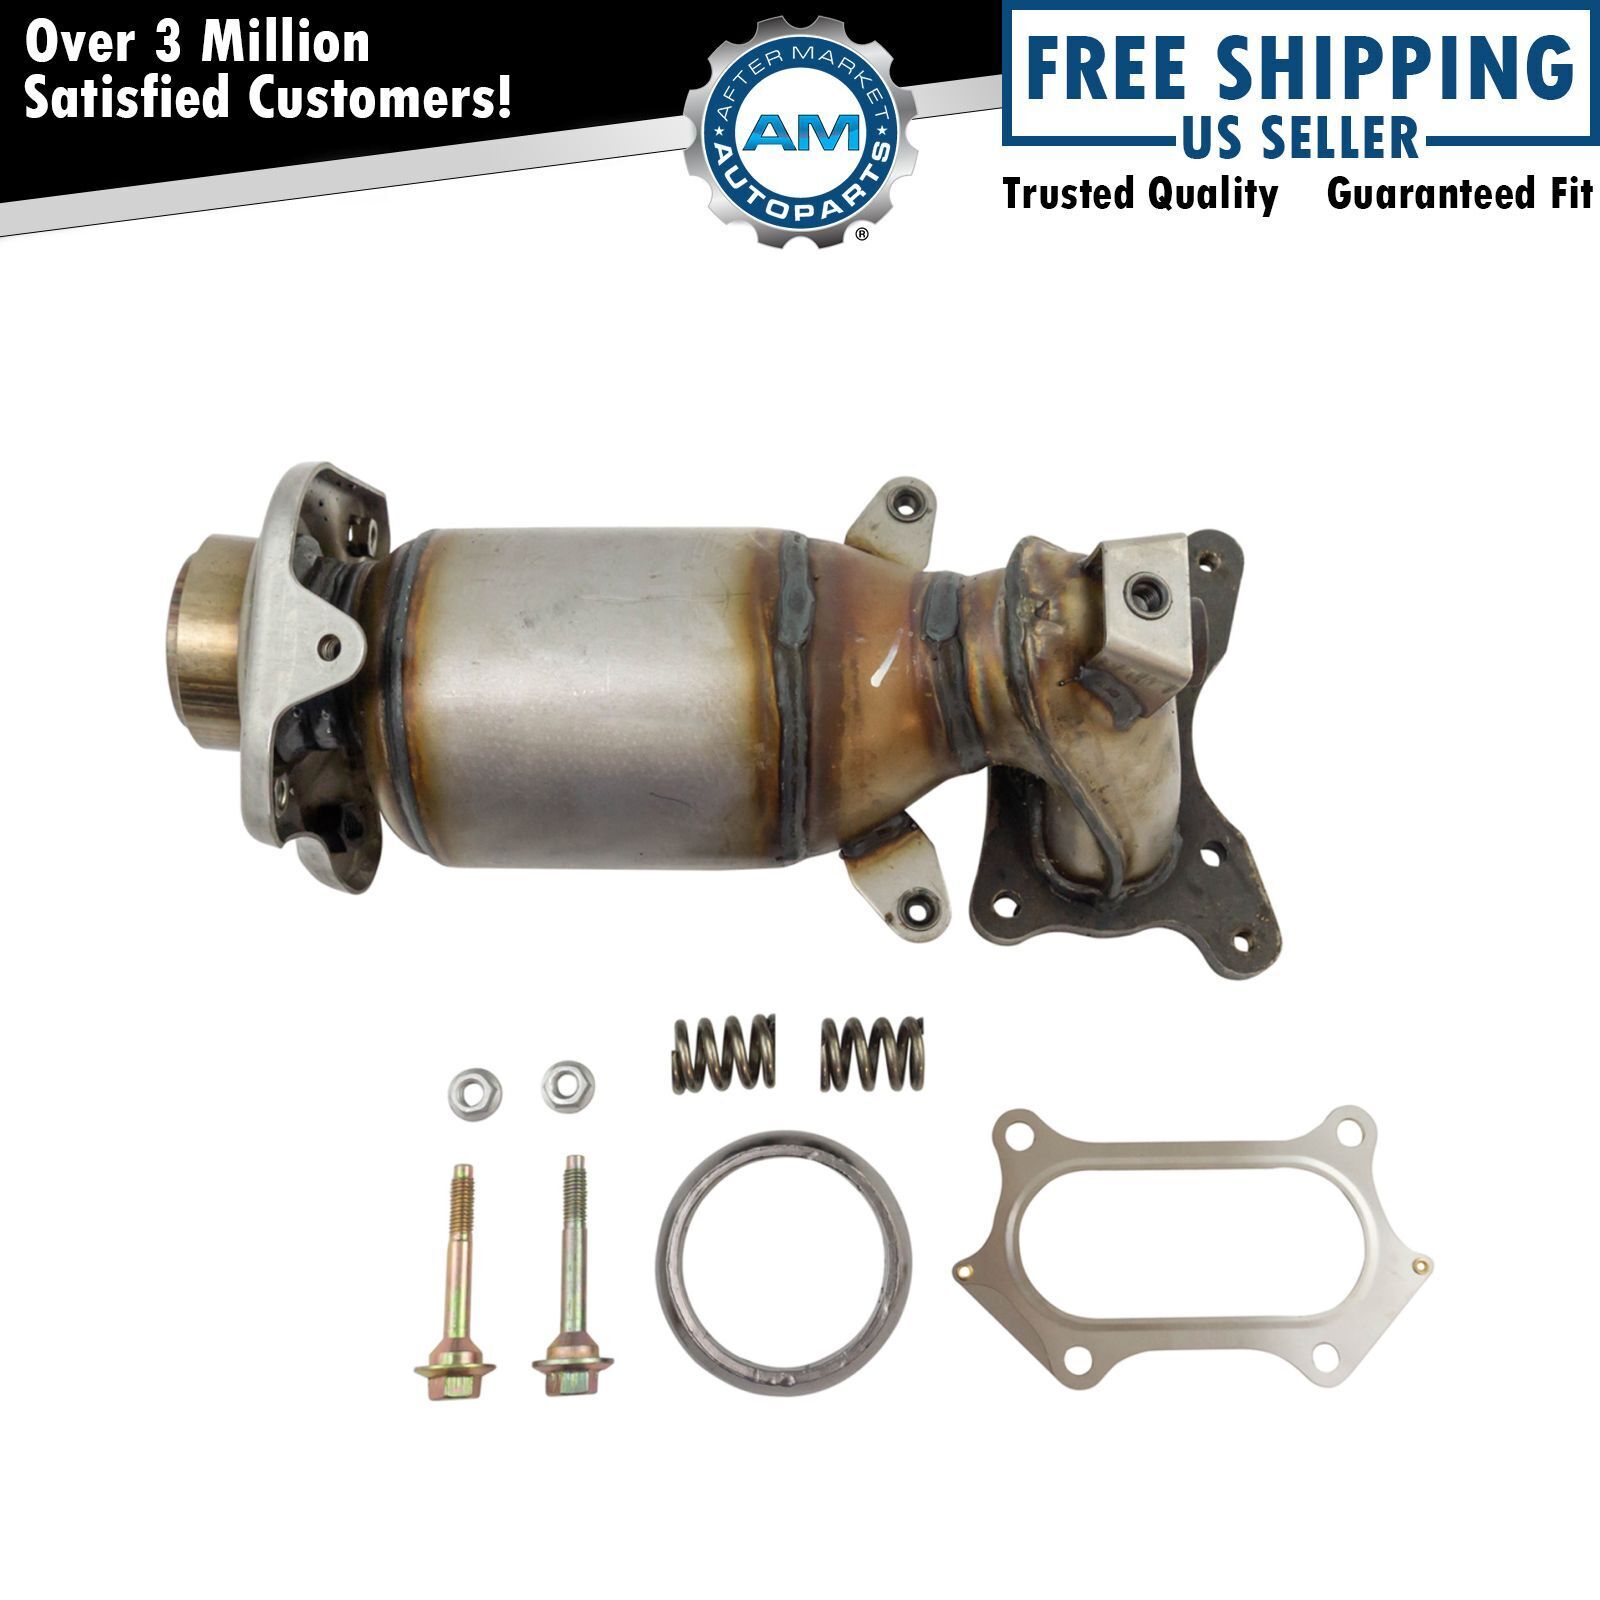 Engine Exhaust Manifold w/ Catalytic Converter Gaskets & Hardware Kit for CR-V